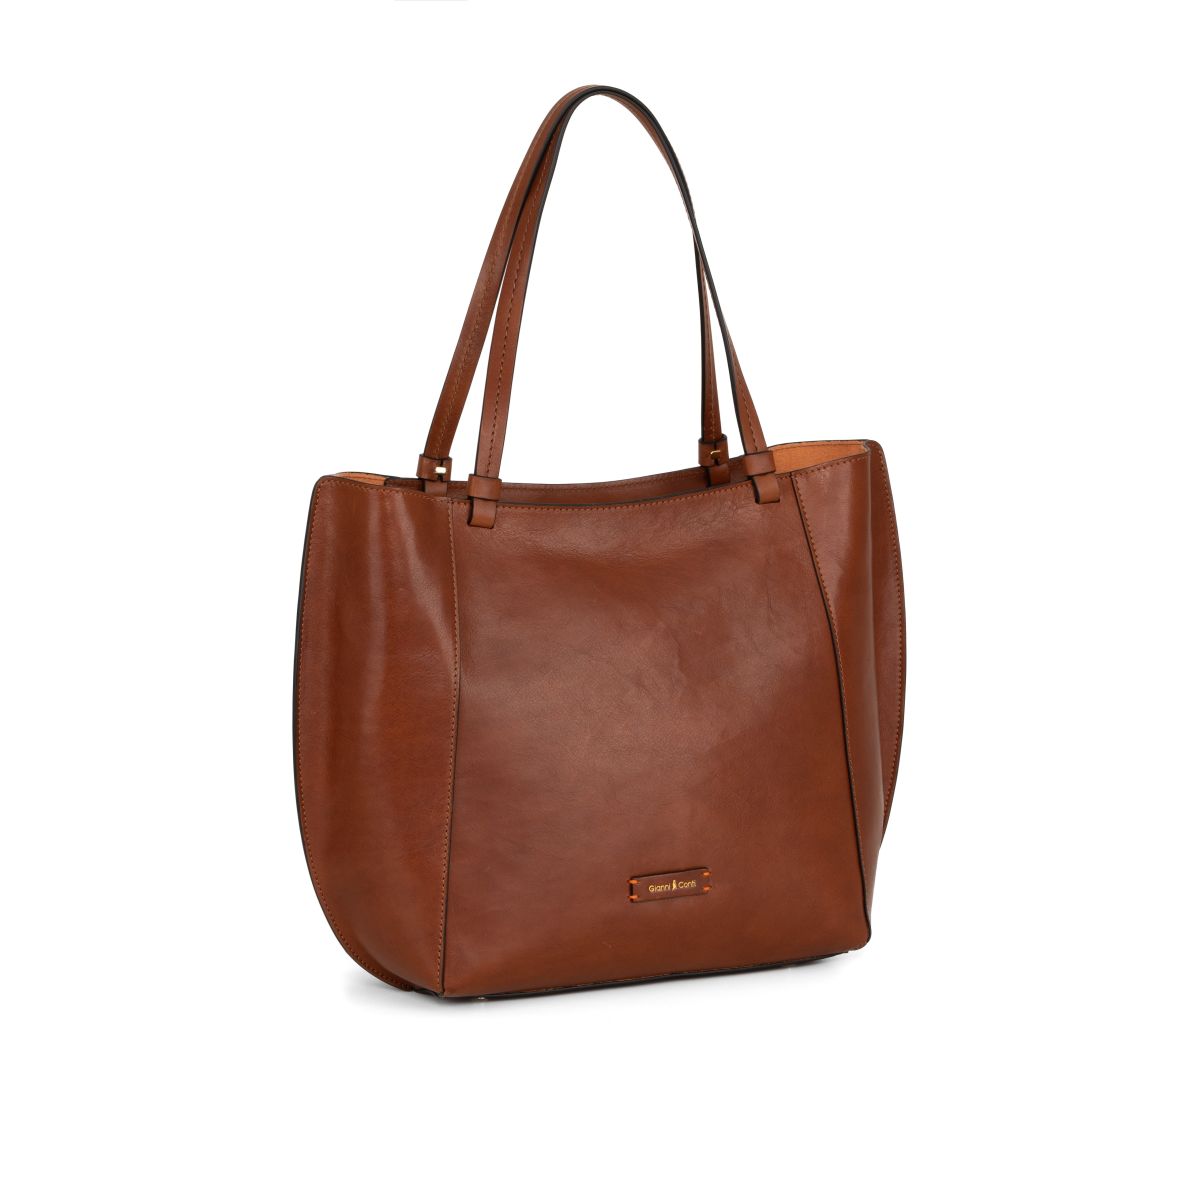 Gianni Conti Madison Vegetable-Tanned Leather Tote Bag